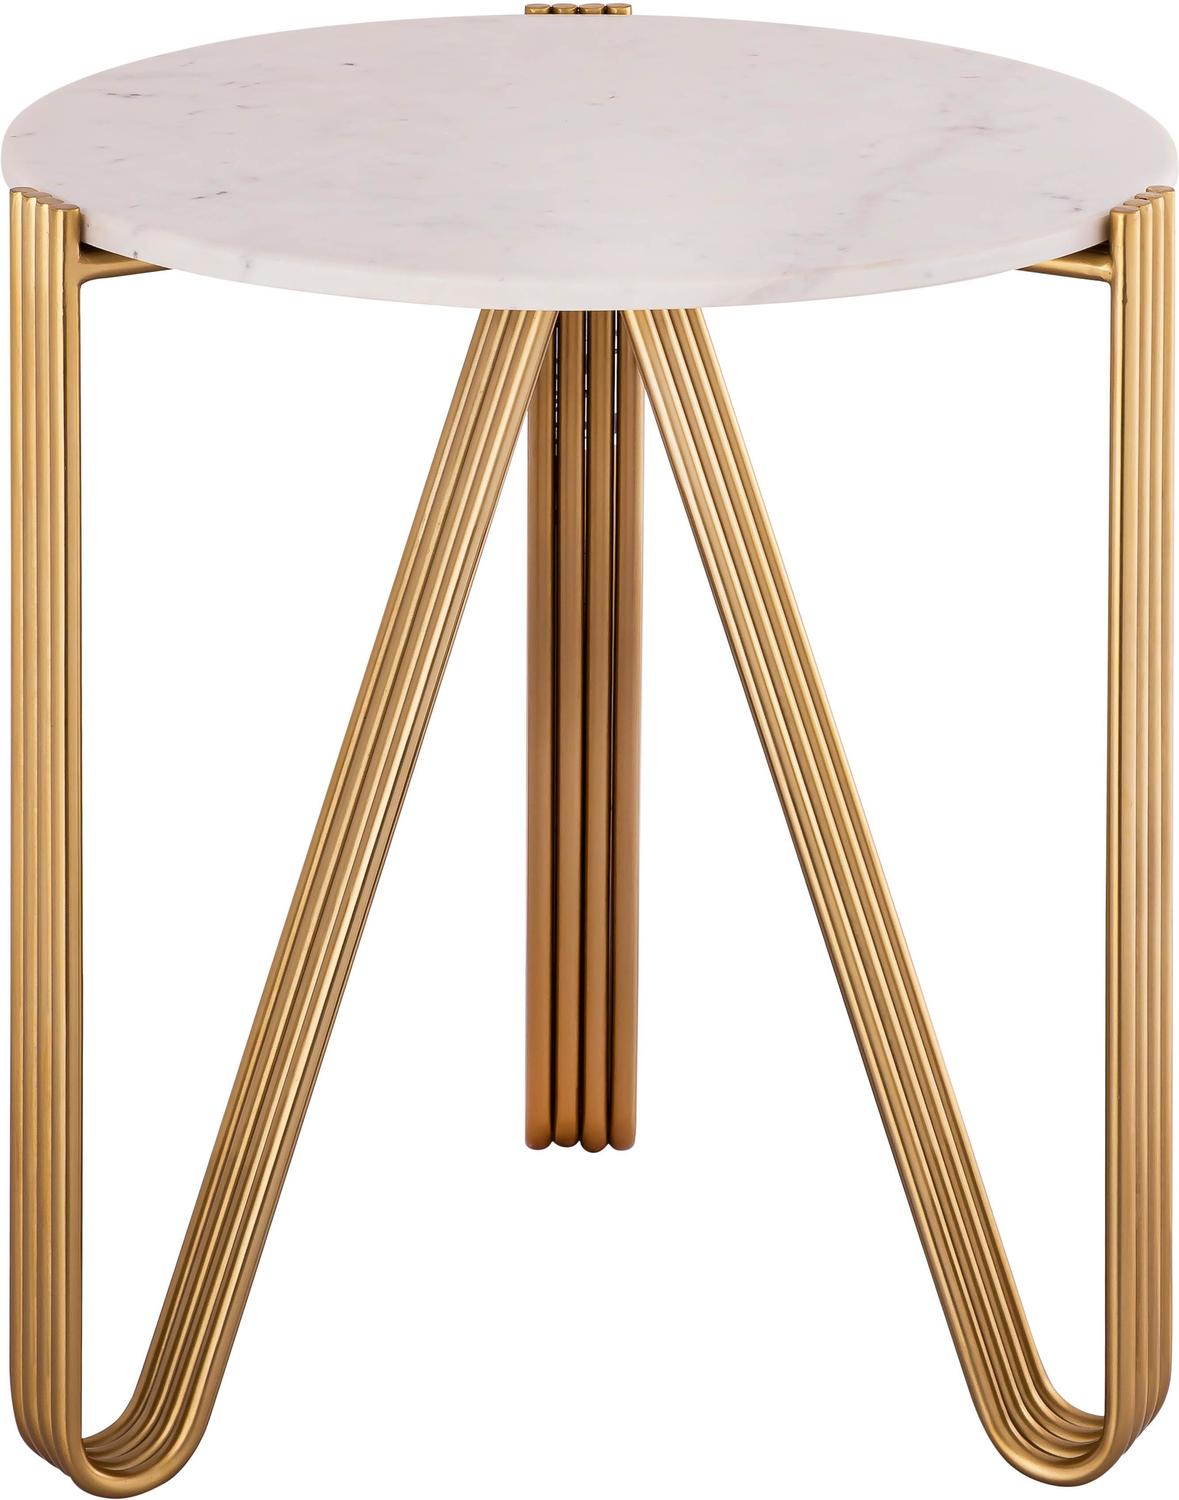 Tov Furniture Side Tables Accent Tables Gold,White